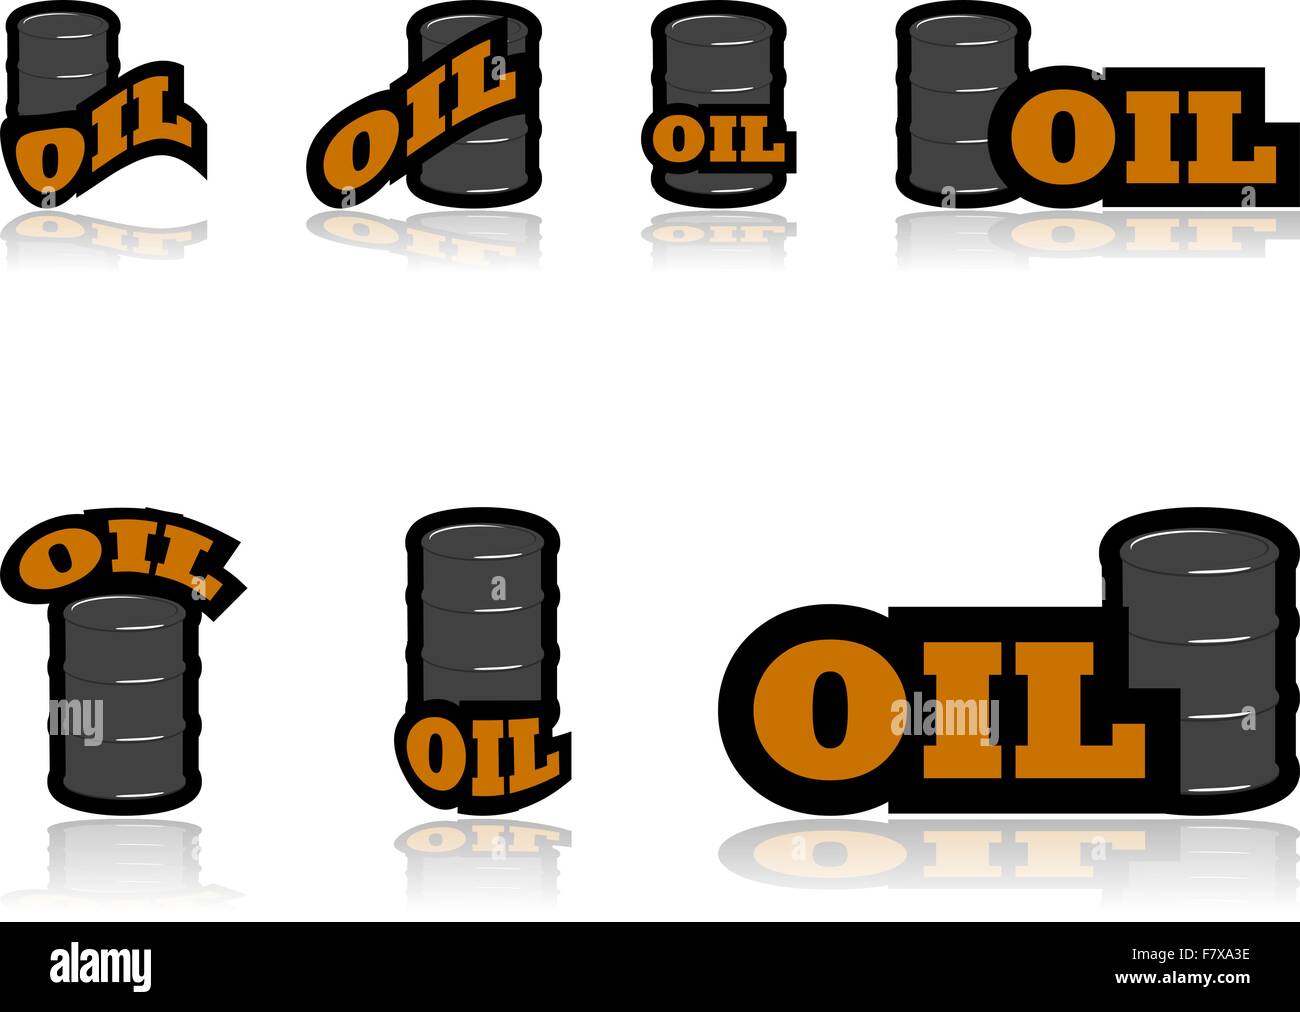 Oil icons Stock Vector